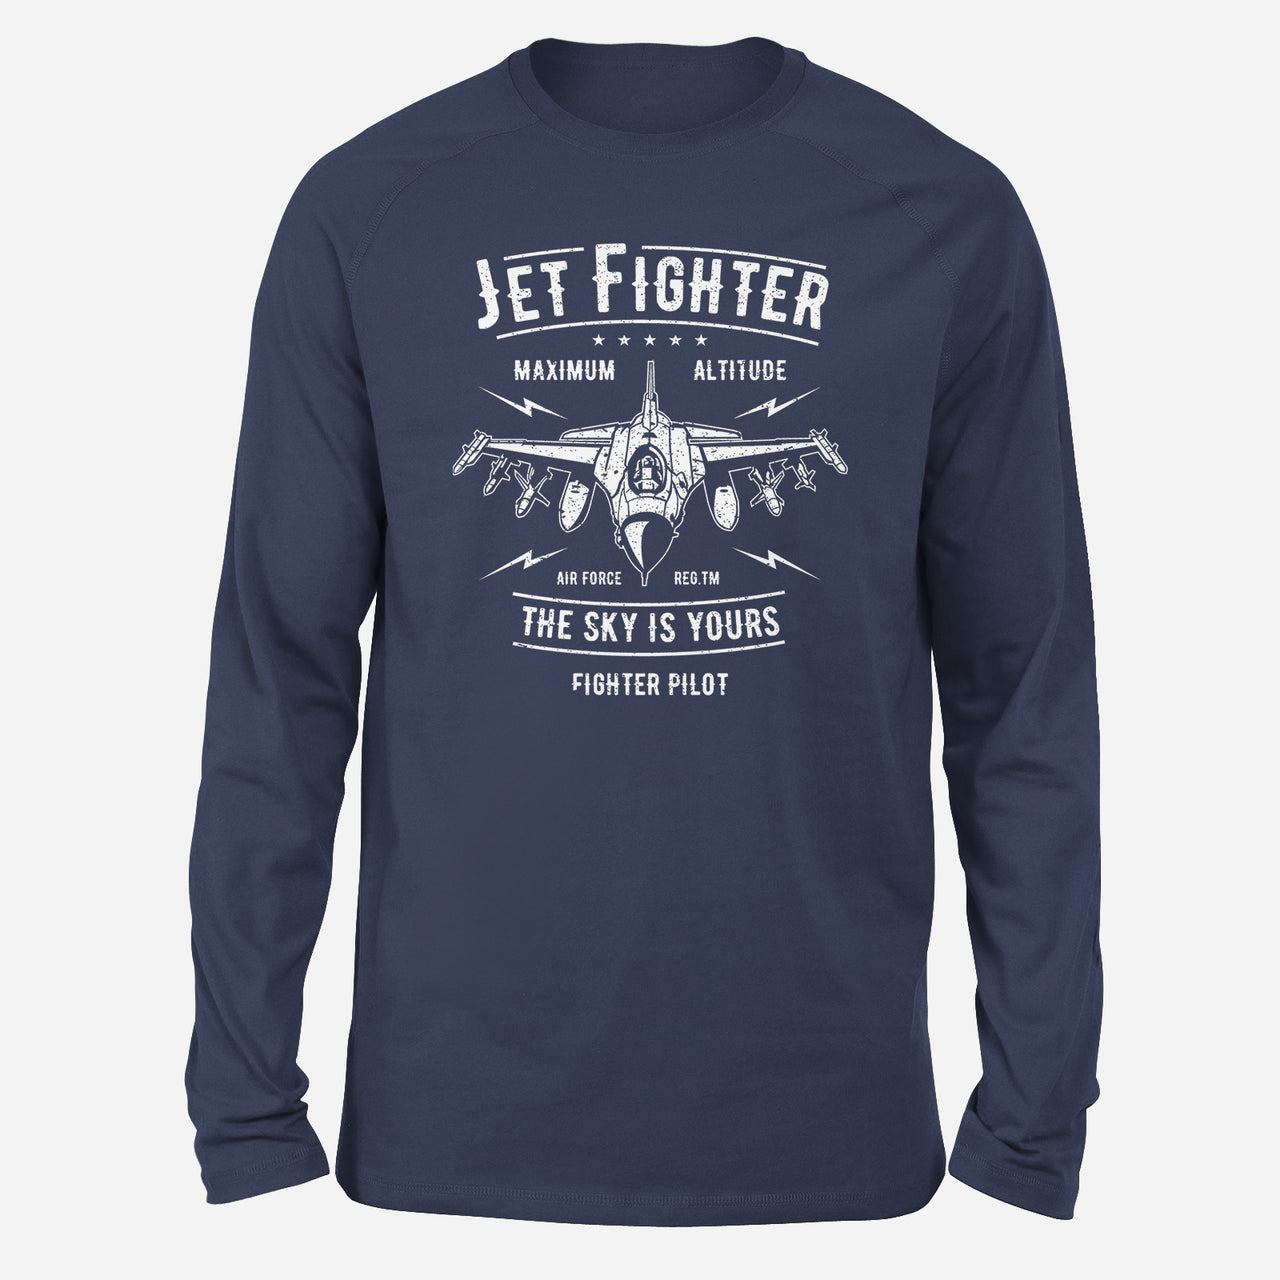 Jet Fighter - The Sky is Yours Designed Long-Sleeve T-Shirts